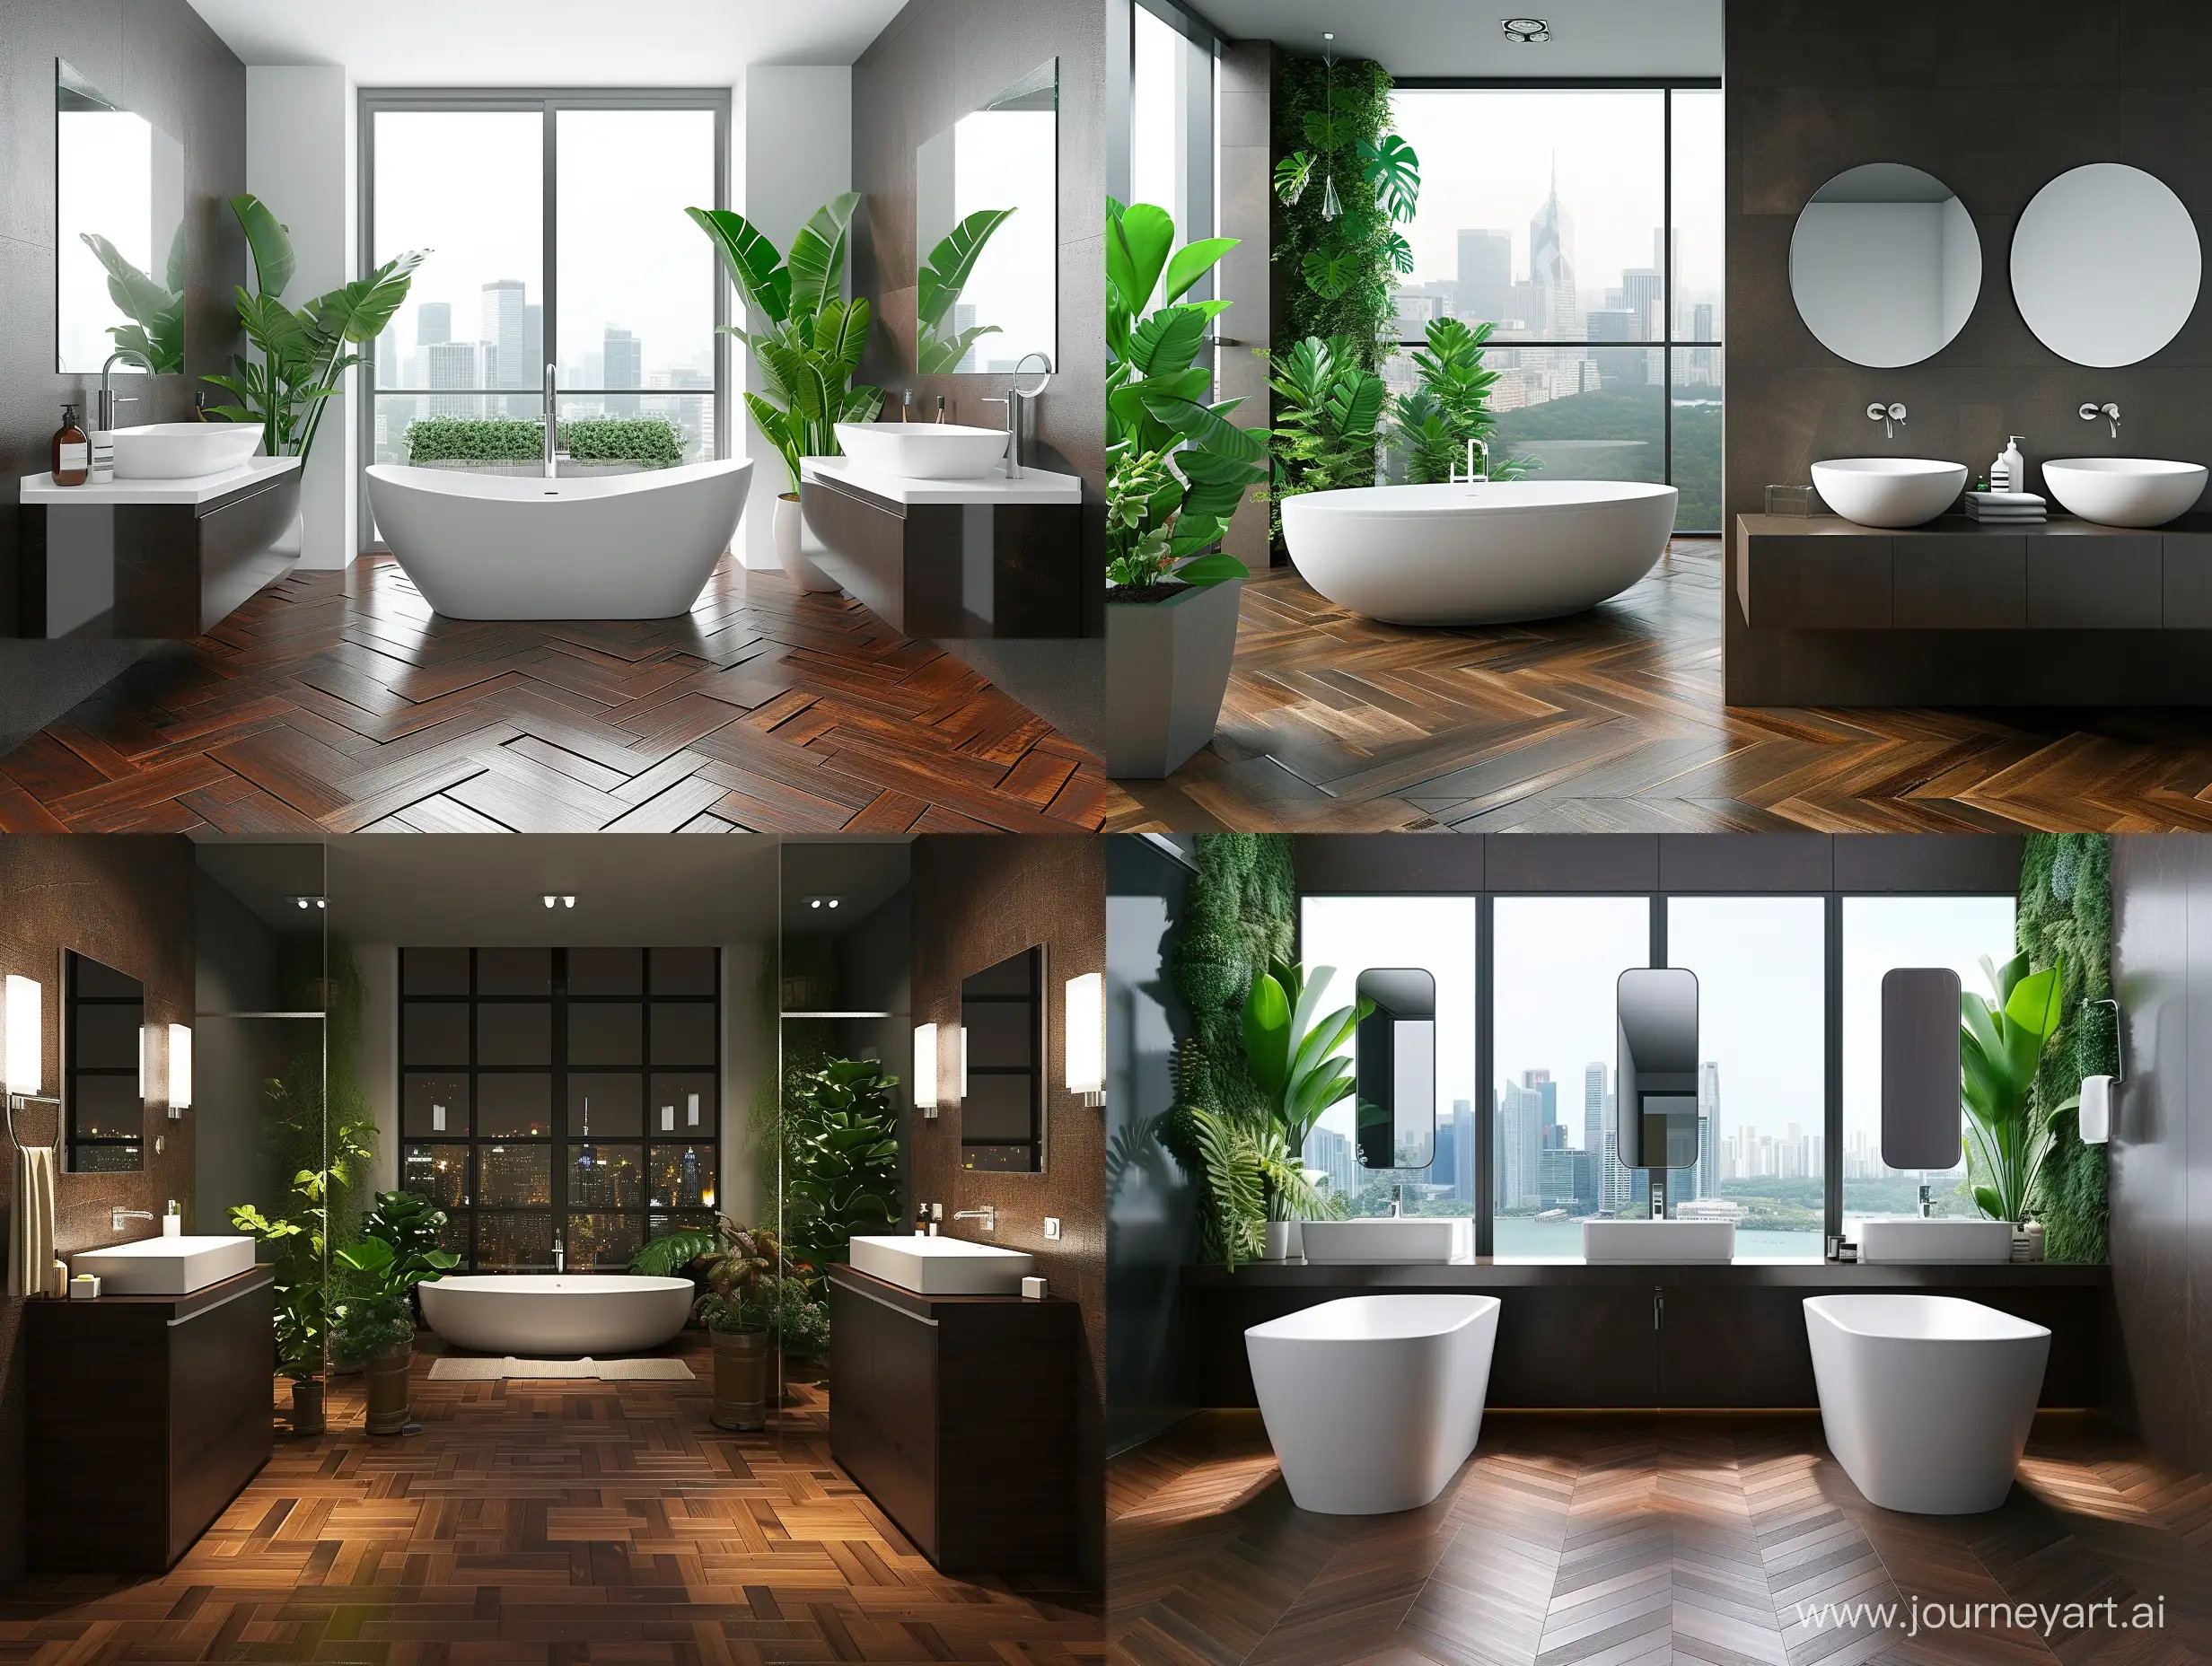 Minimalist-Modern-Bathroom-Interior-with-Double-Sinks-and-City-View